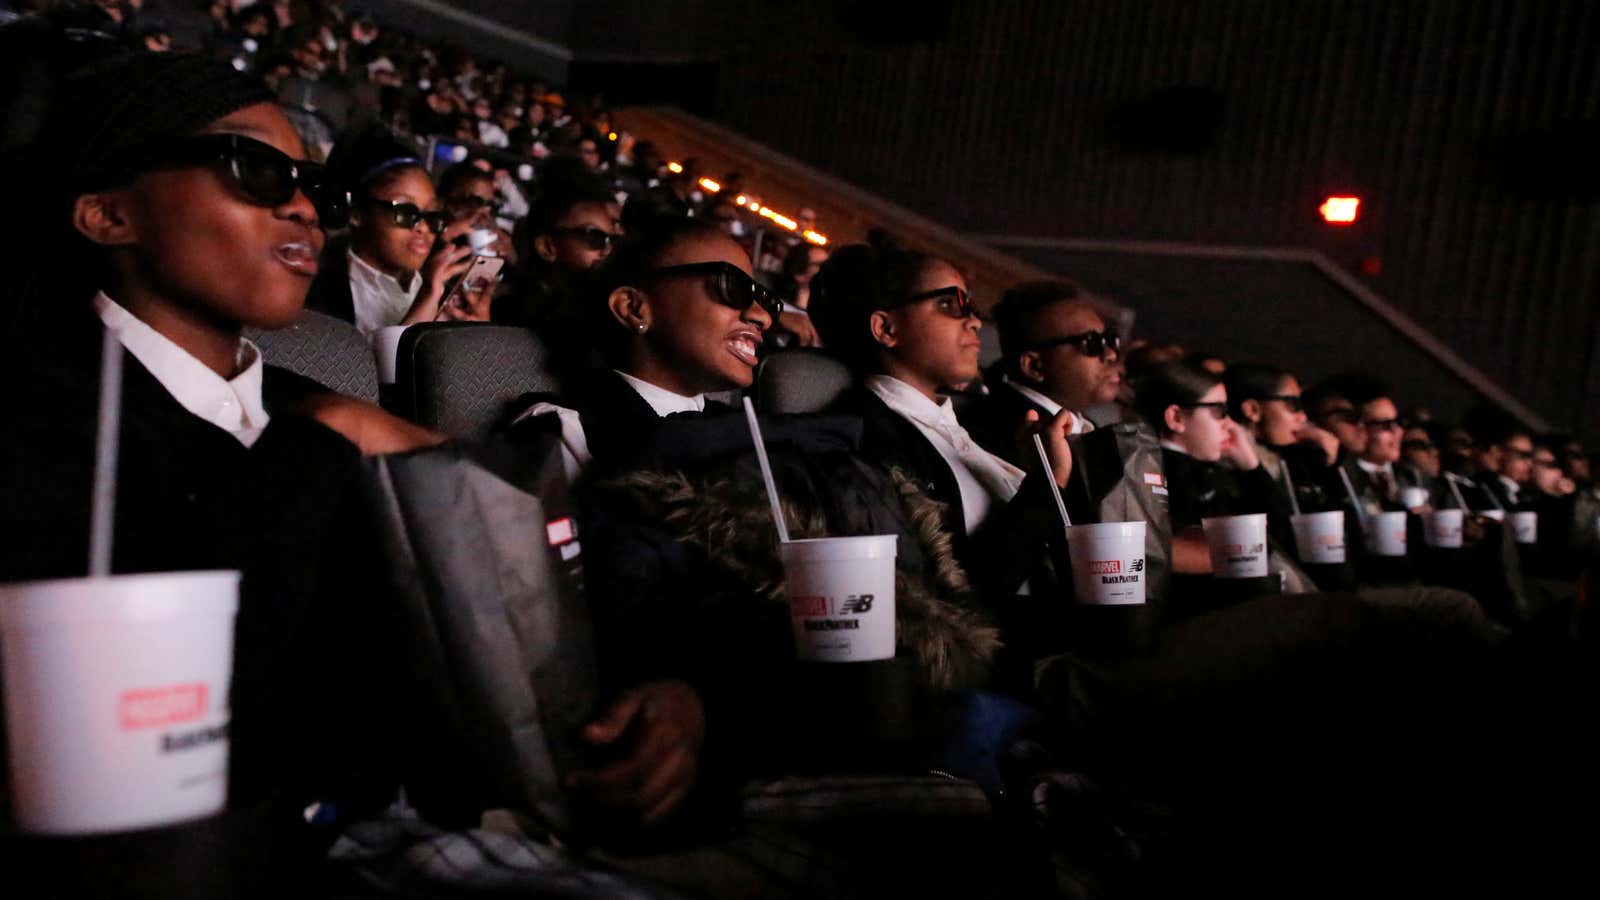 A group of students from the Capital Preparatory Harlem School watch a screening of the film “Black Panther” on its opening night.